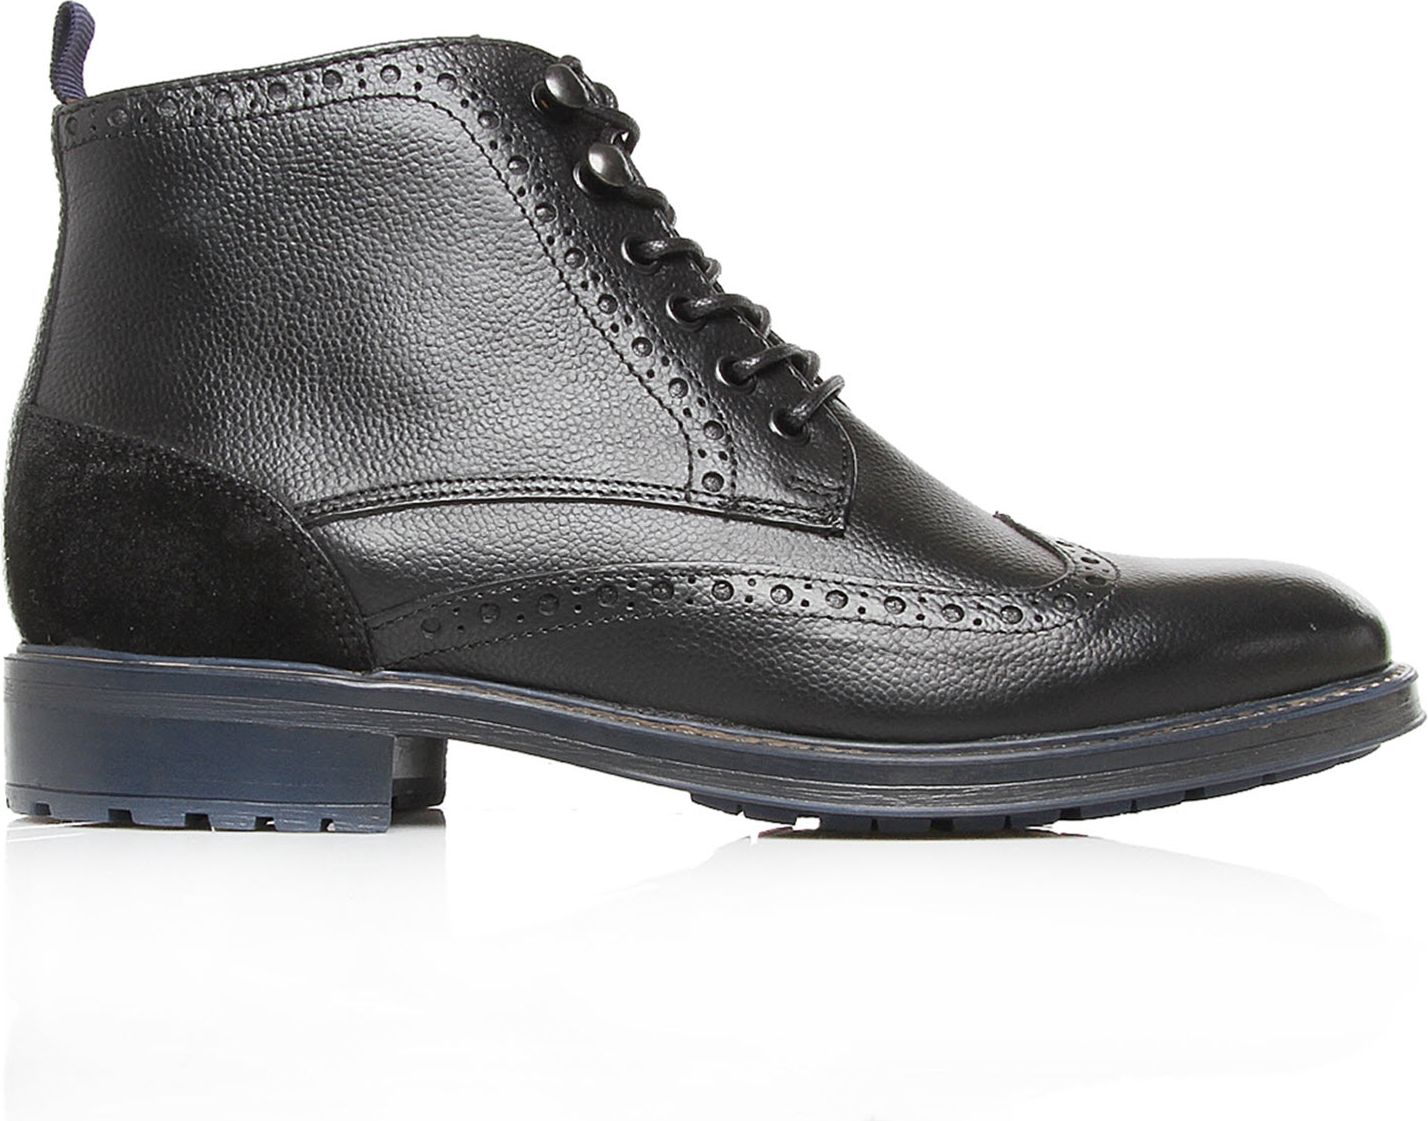 Kg by kurt geiger Wilson Leather Brogue Boots in Black | Lyst